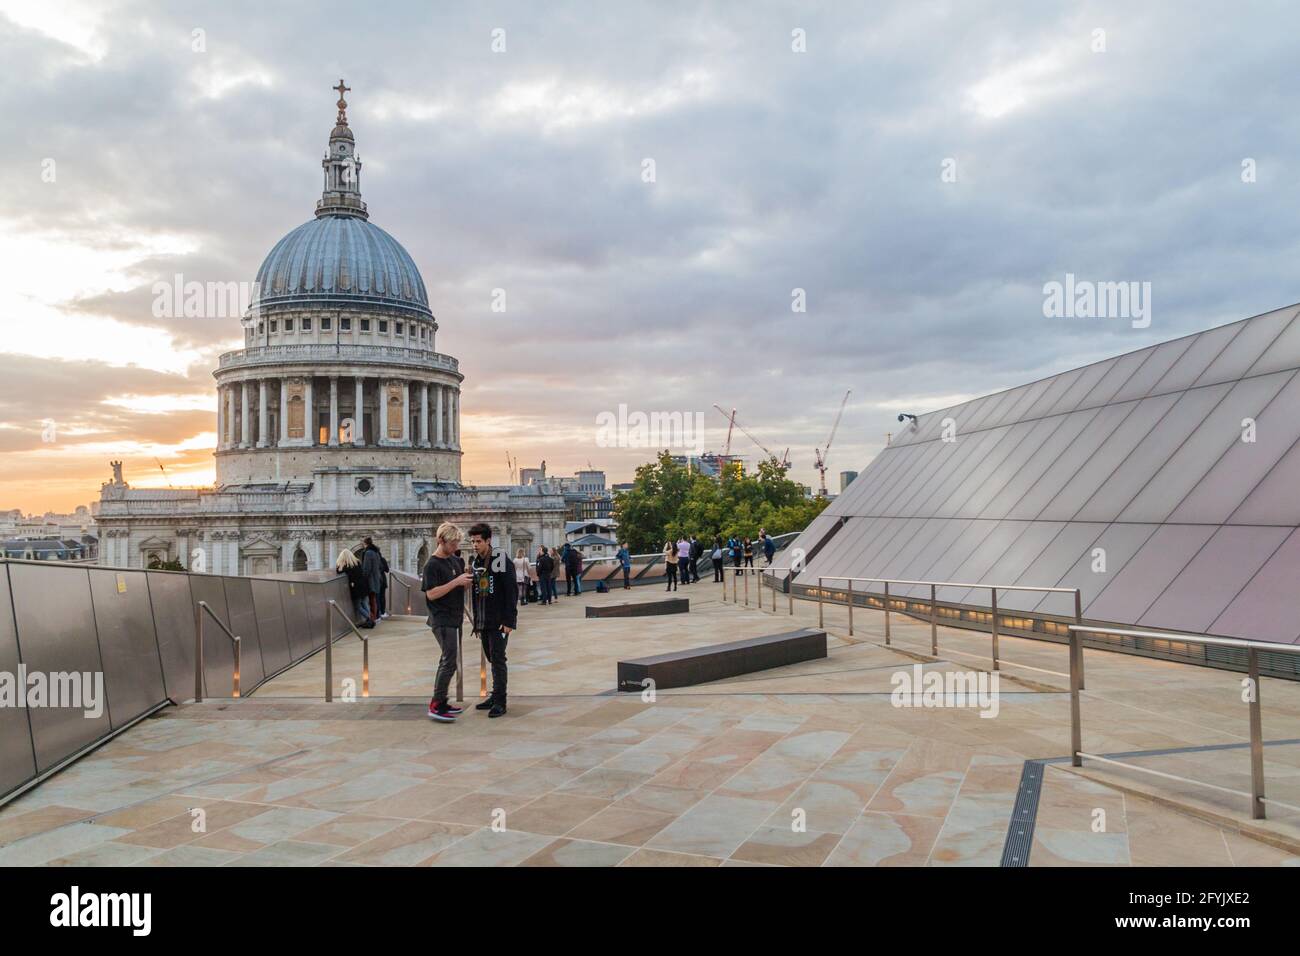 LONDON, UNITED KINGDOM - OCTOBER 4, 2017: People at the observation deck of One New Change Rooftop in London look at the cupola of St. Paul's Cathedra Stock Photo